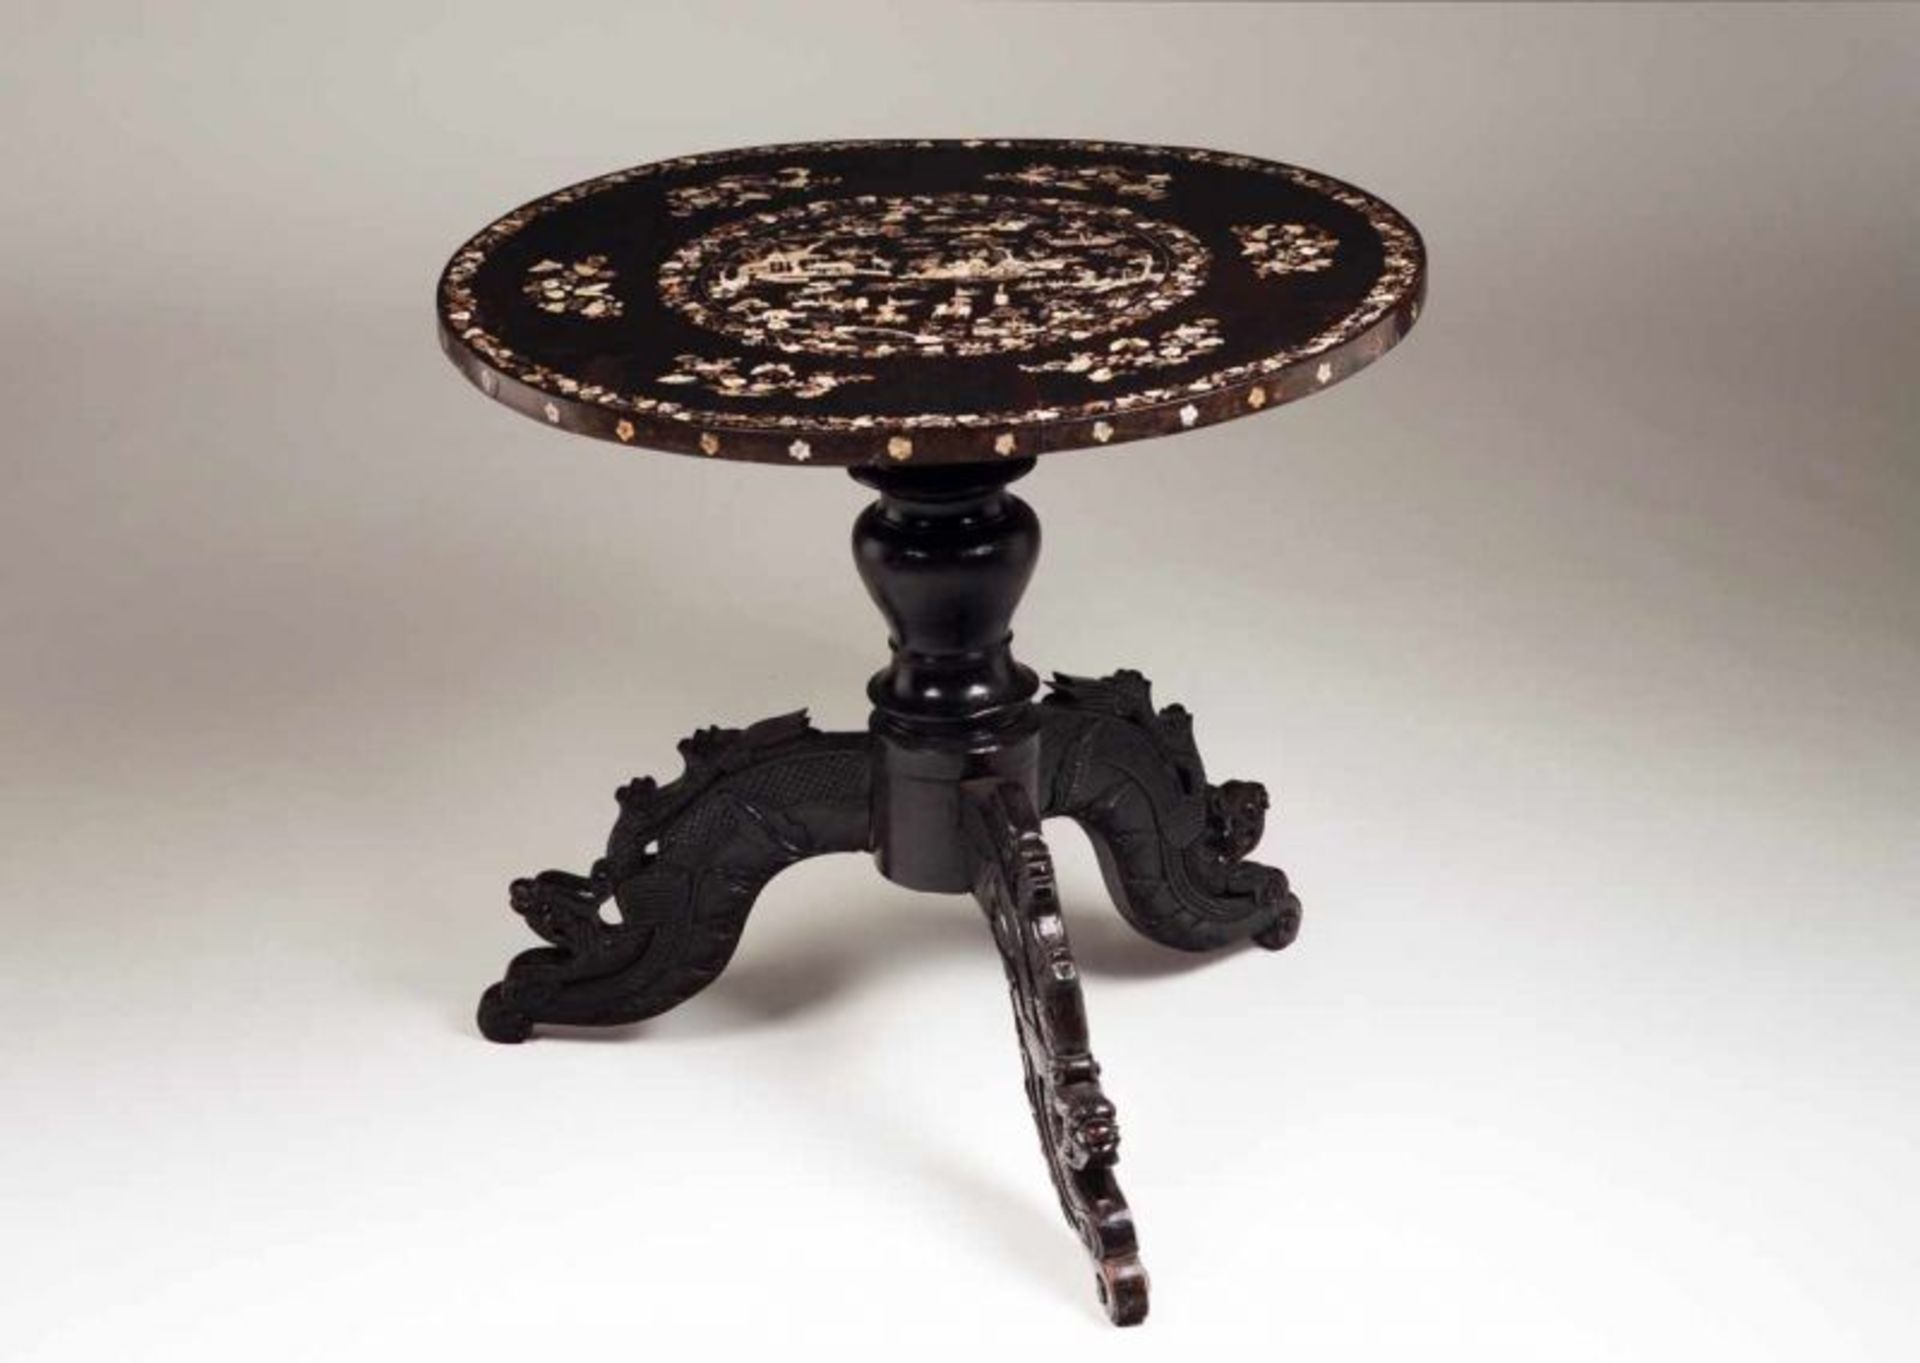 A table Ebonized wood Richly decorated top with mother-of-pearl inlays depicting bouquets and